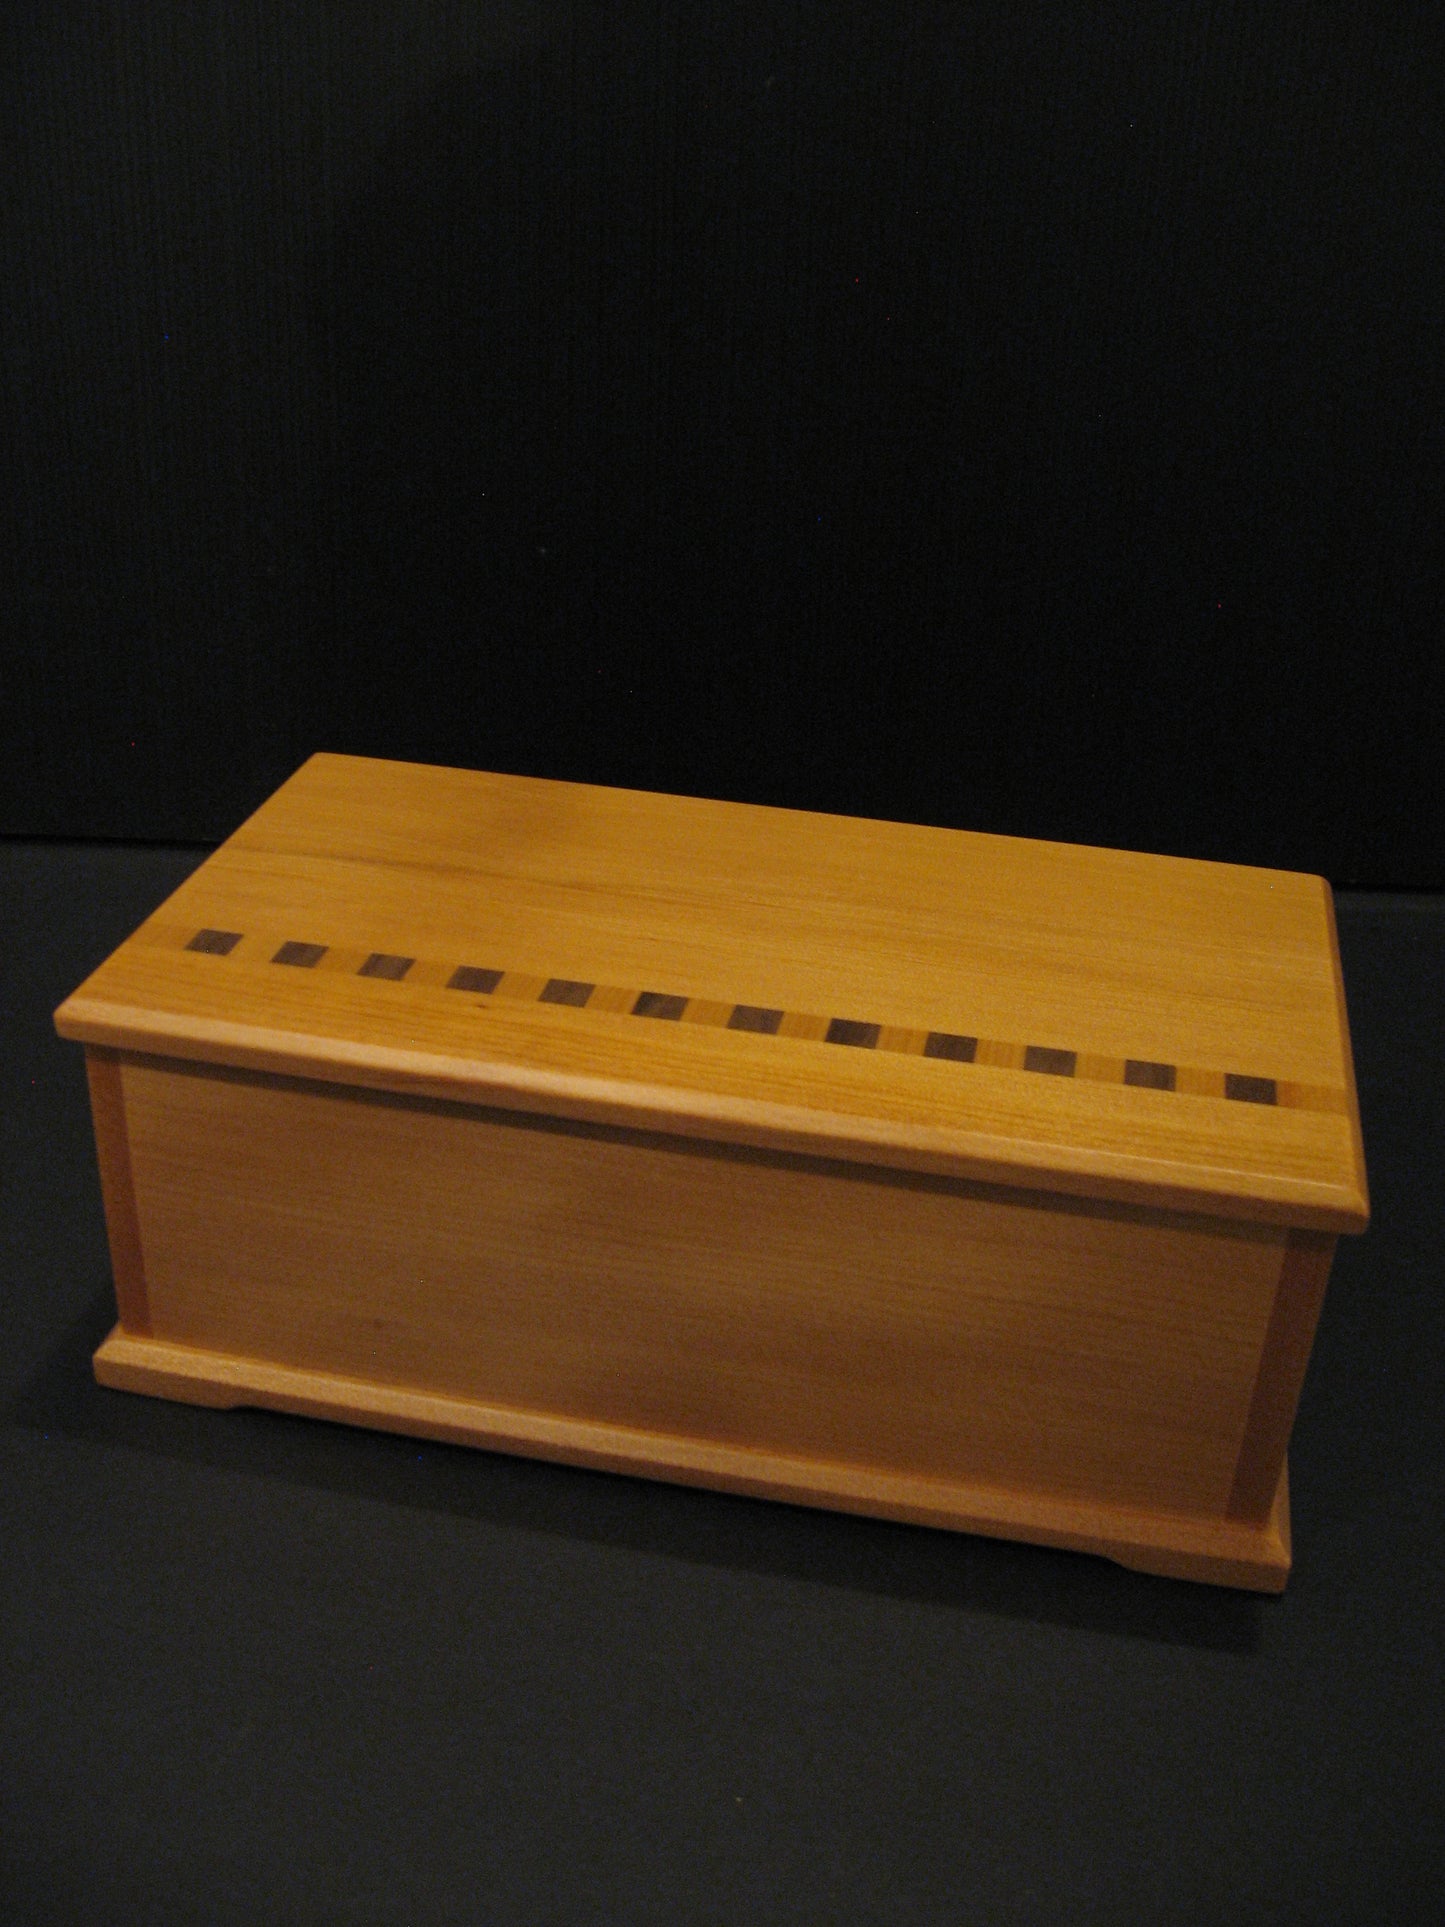 Deluxe Kauri Wooden Jewellery Box by Timber Arts NZ Silver Fern Gallery